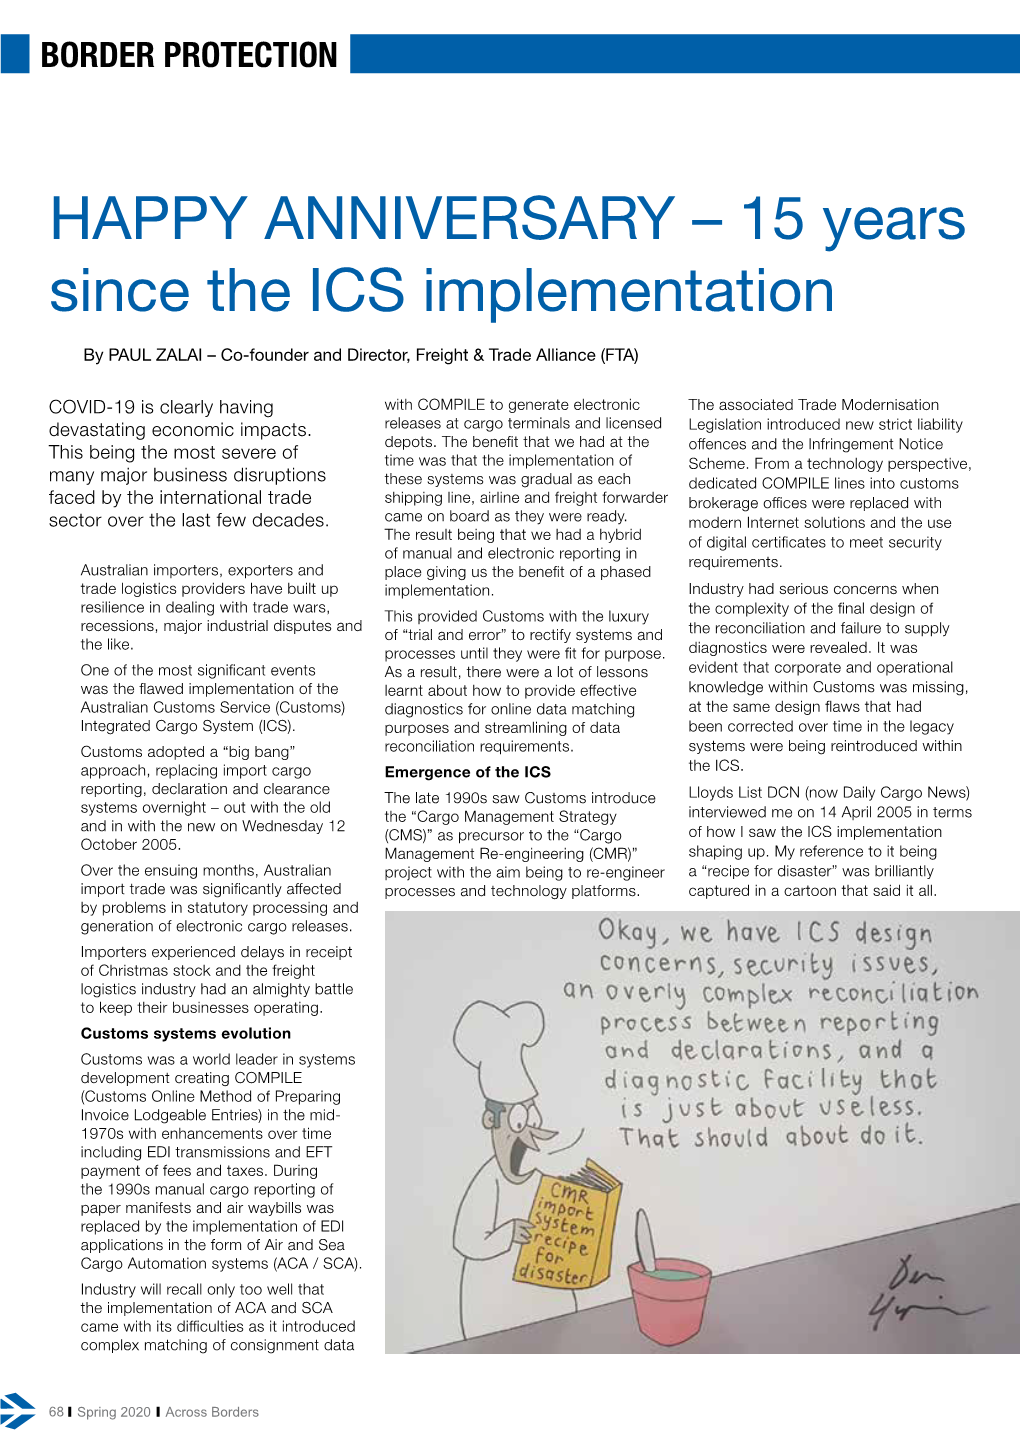 HAPPY ANNIVERSARY – 15 Years Since the ICS Implementation by PAUL ZALAI – Co-Founder and Director, Freight & Trade Alliance (FTA)